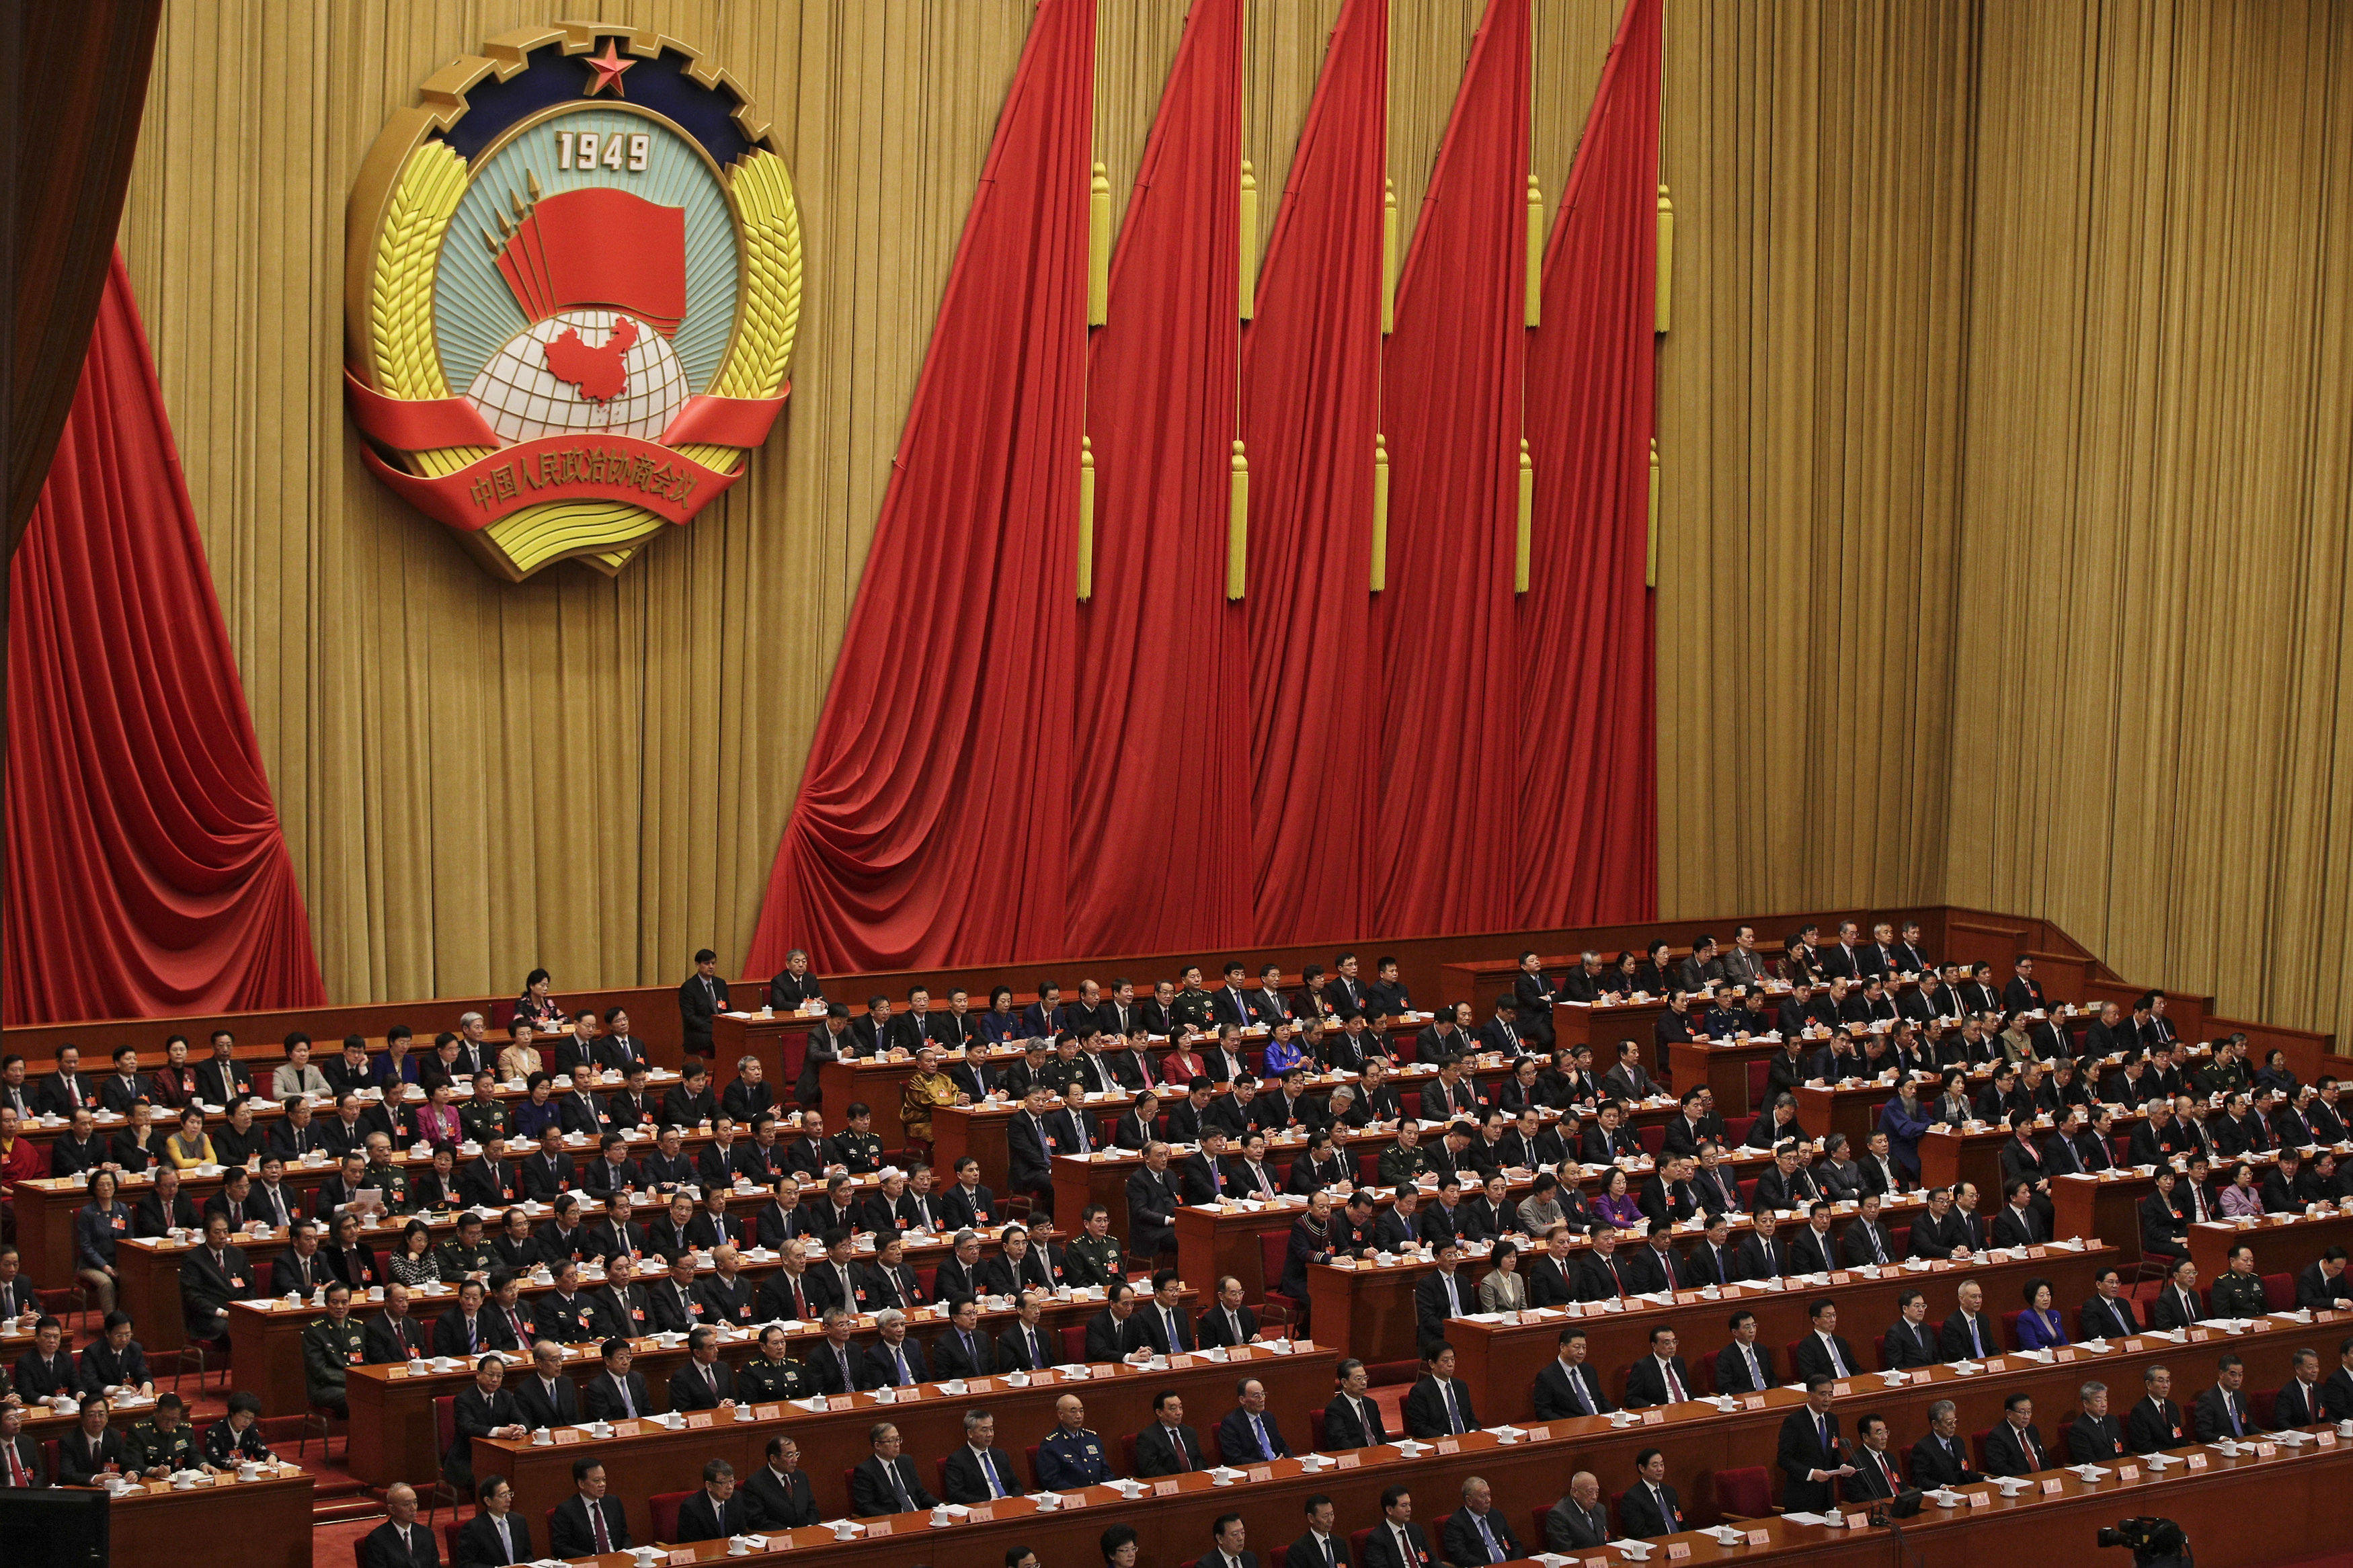 Chinese People's Political Consultative Conference (CPPCC) chairman and Politburo Standing Committee member Wang Yang delivers a closing speech for the Chinese People's Political Consultative Conference (CPPCC) at the Great Hall of the People in Beijing, Wednesday, March 13, 2019. (AP Photo/Andy Wong)